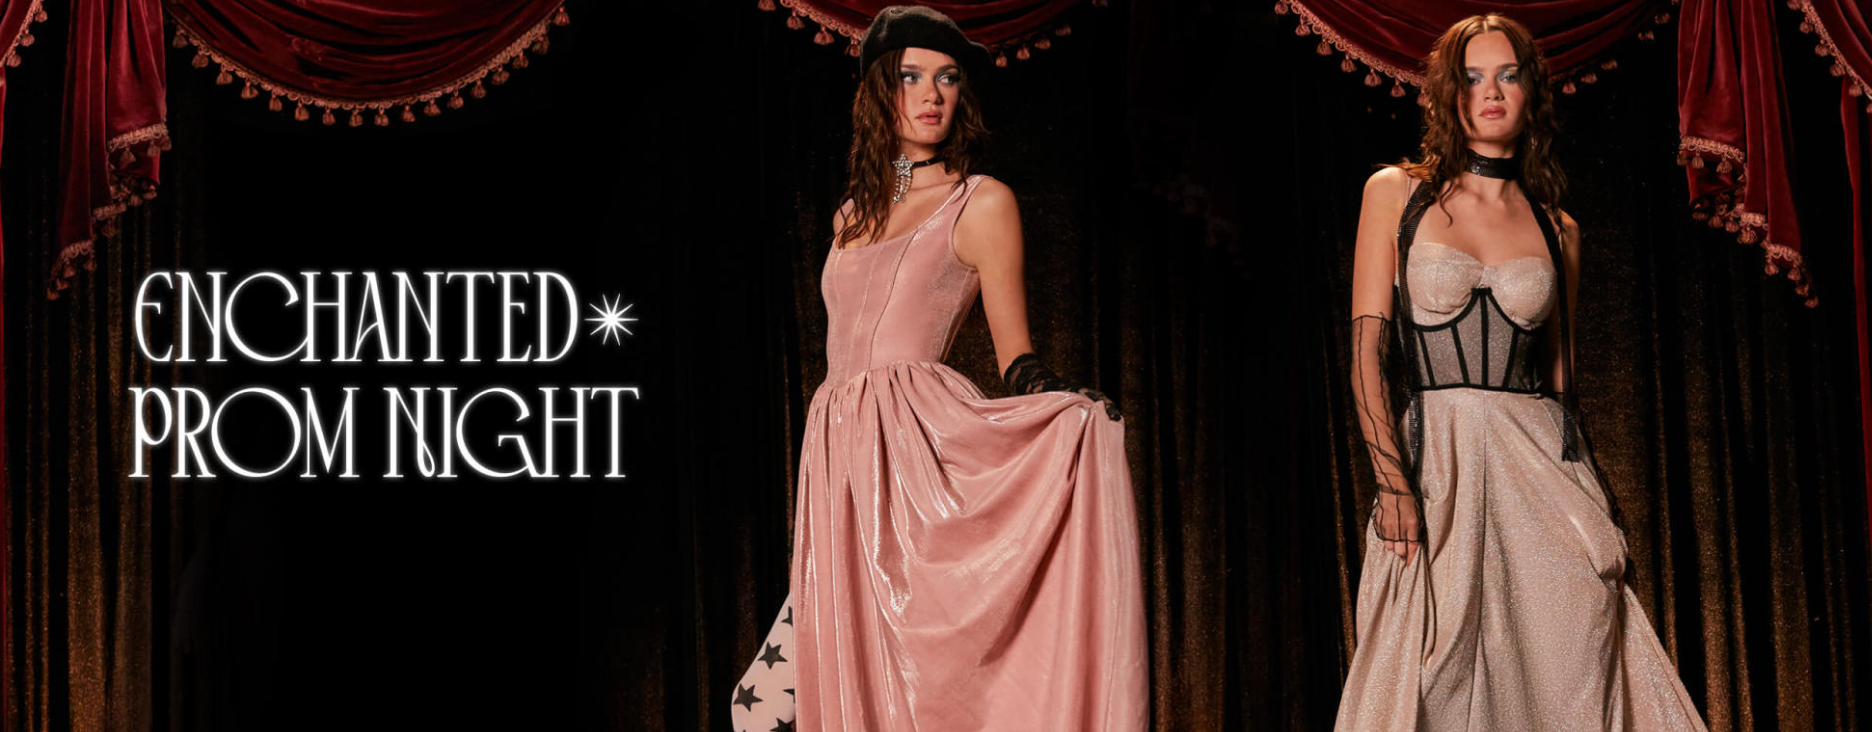 Enchanted Prom Night: Affordable, Statement Prom Dresses For Any Aesthetic